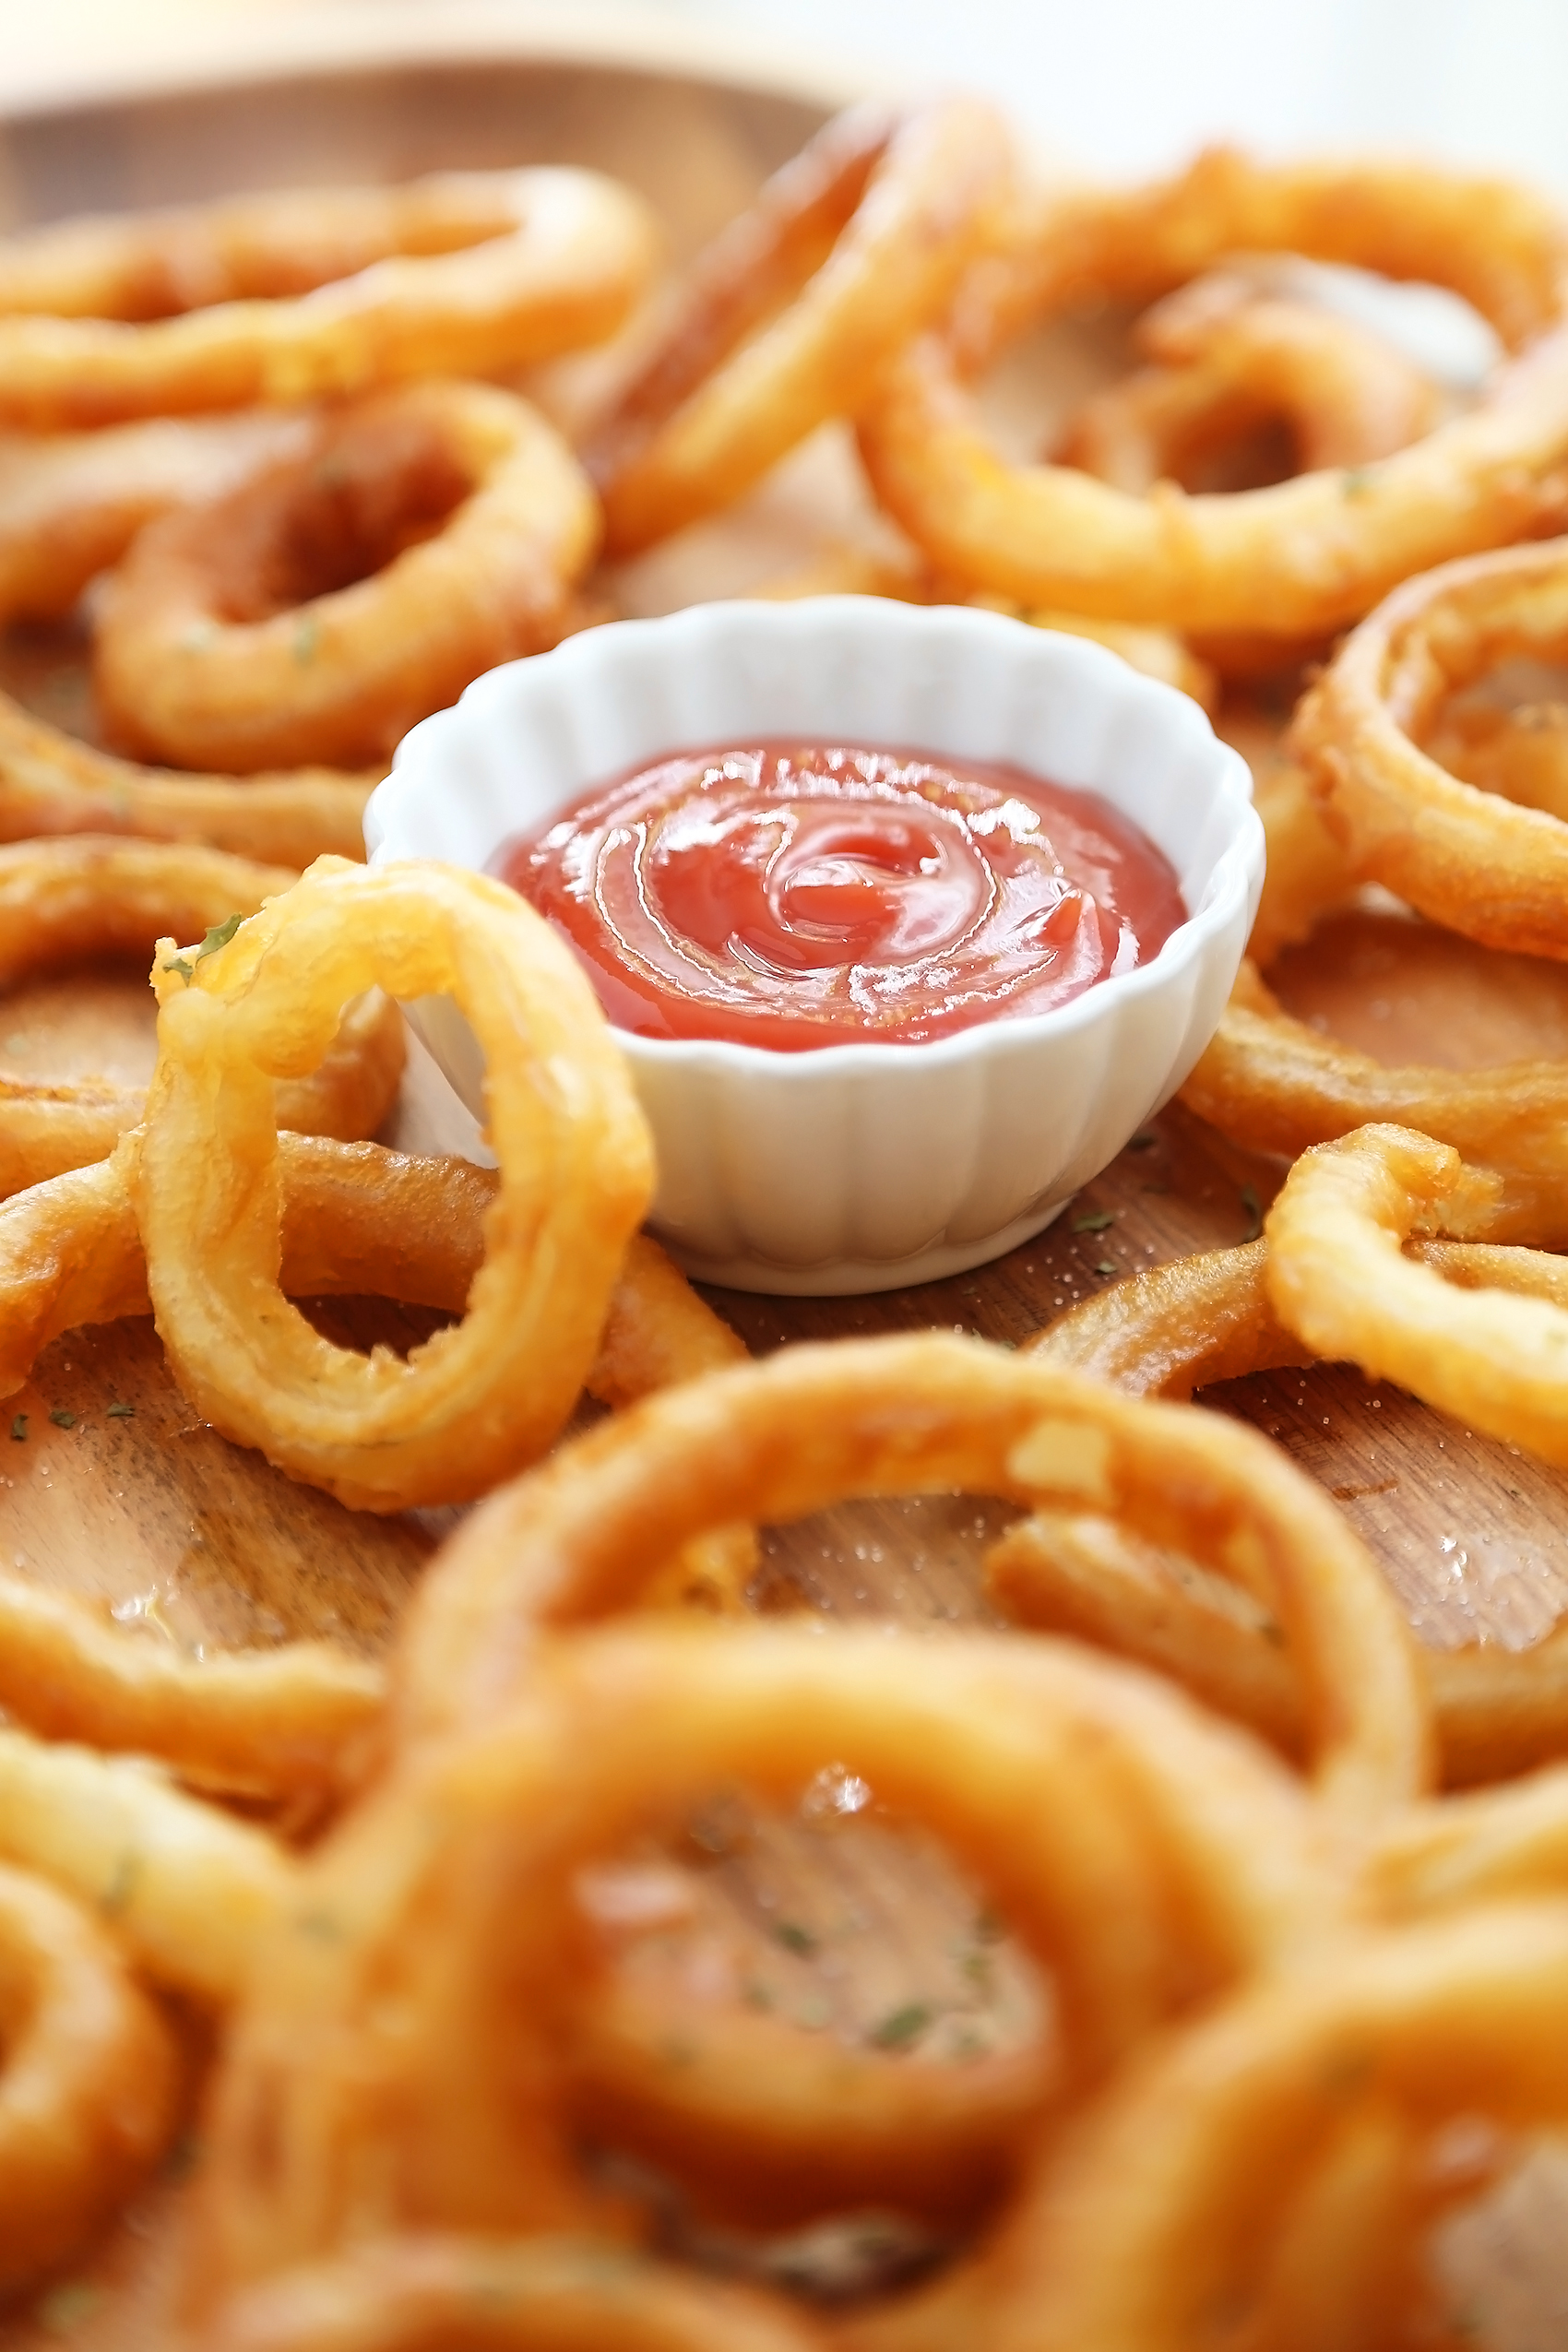 Foolproof Crispy Onion Rings - Snack on a stack of these crispy, salty onion rings! Best-ever recipe for the perfect game-day and family night comfort food! thecomfortofcooking.com